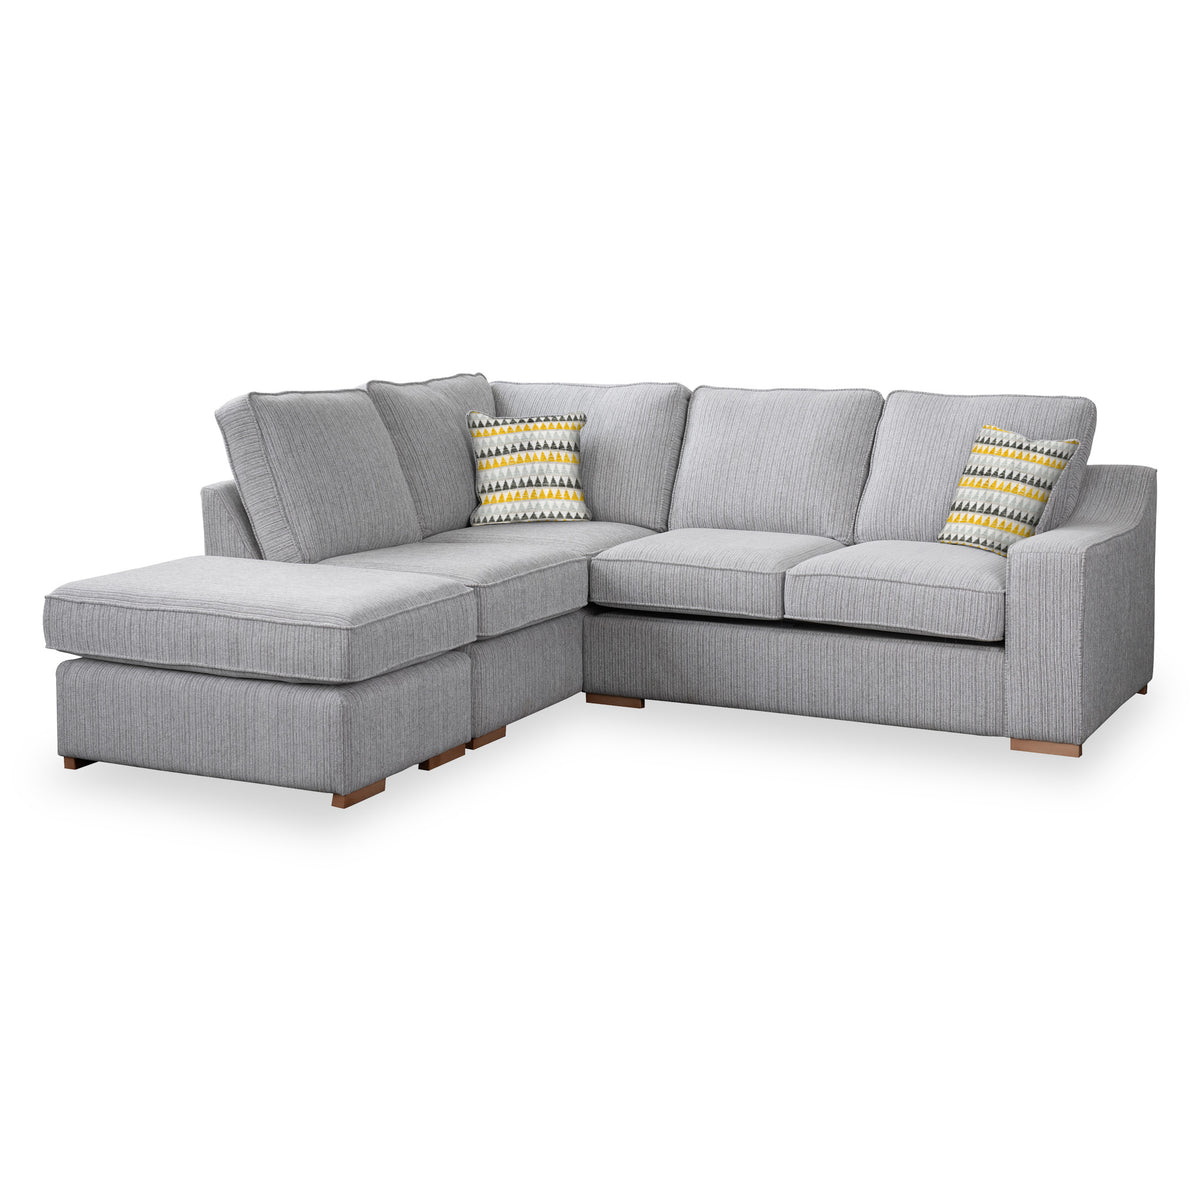 Ashow Silver Left Hand Corner Sofabed with Maika Mustard Scatter Cushions from Roseland furniture